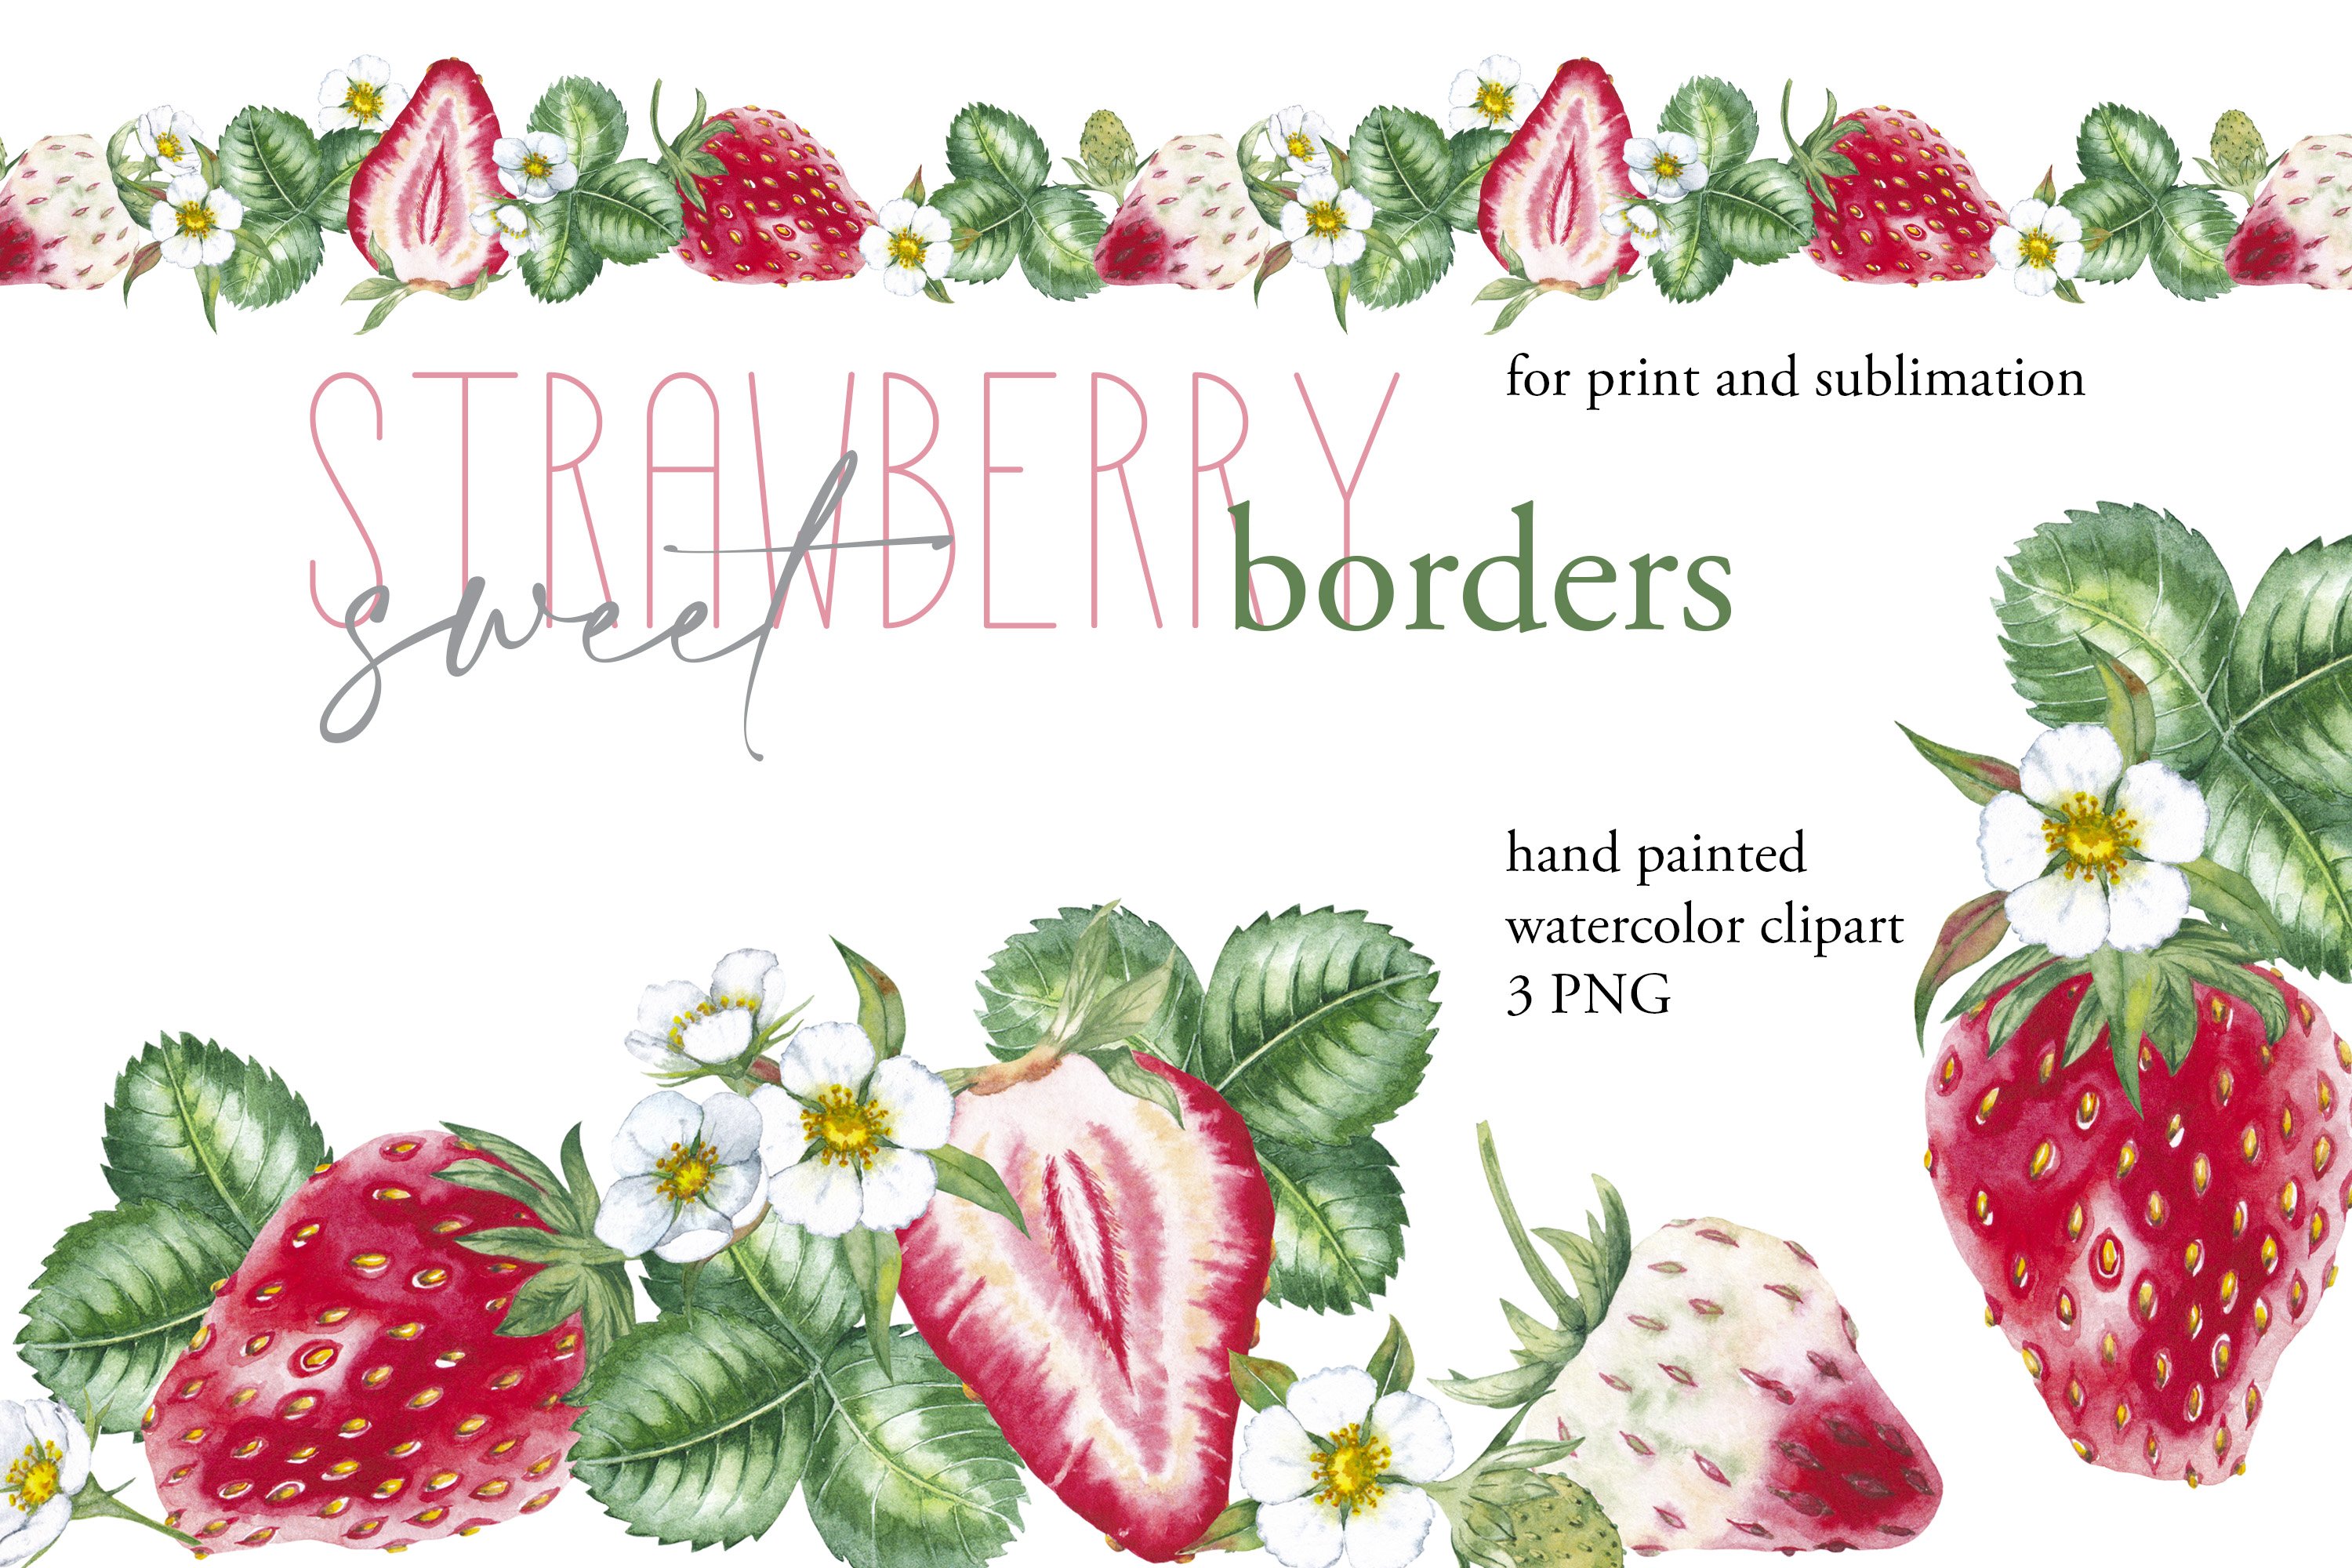 Pink, green and gray lettering "Strawberry Sweet Borders" and different illustrations of a strawberry.